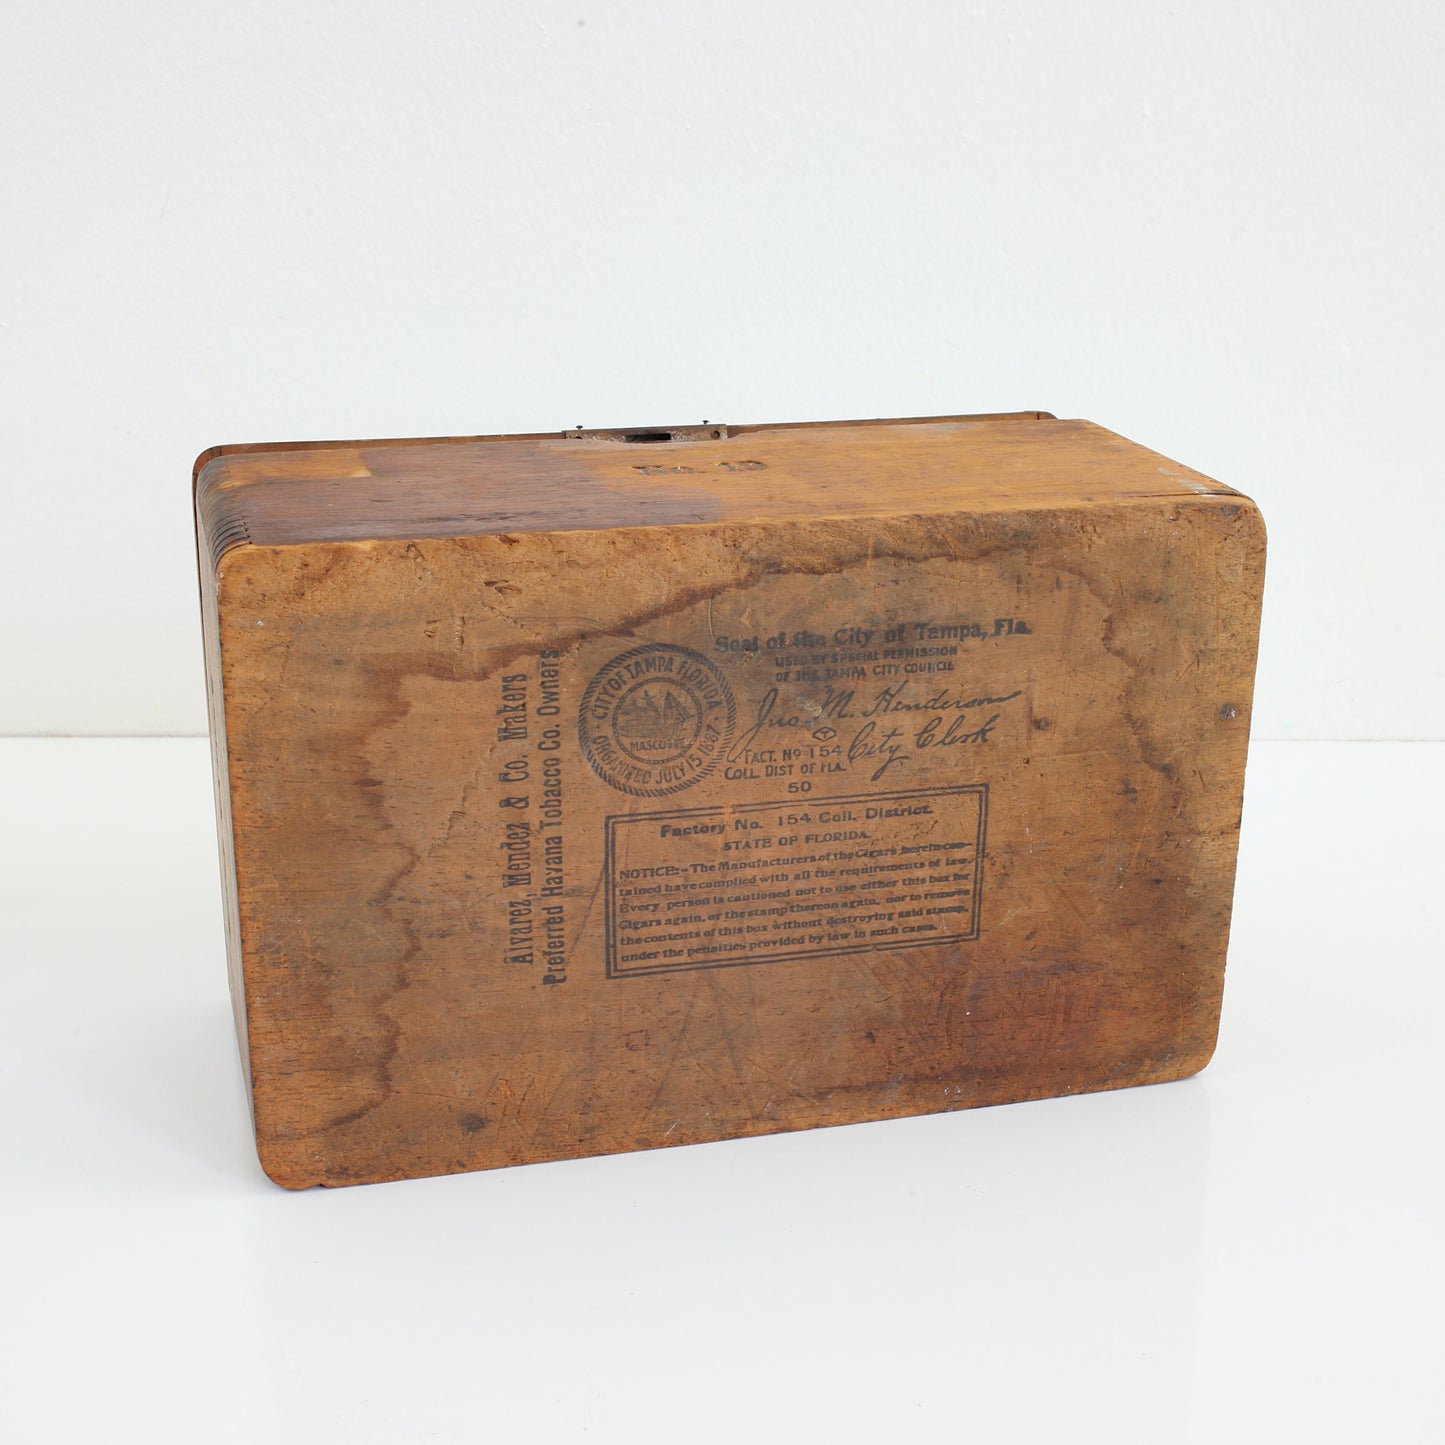 SOLD - Vintage Henry The Fourth No. 19 Wooden Cigar Box